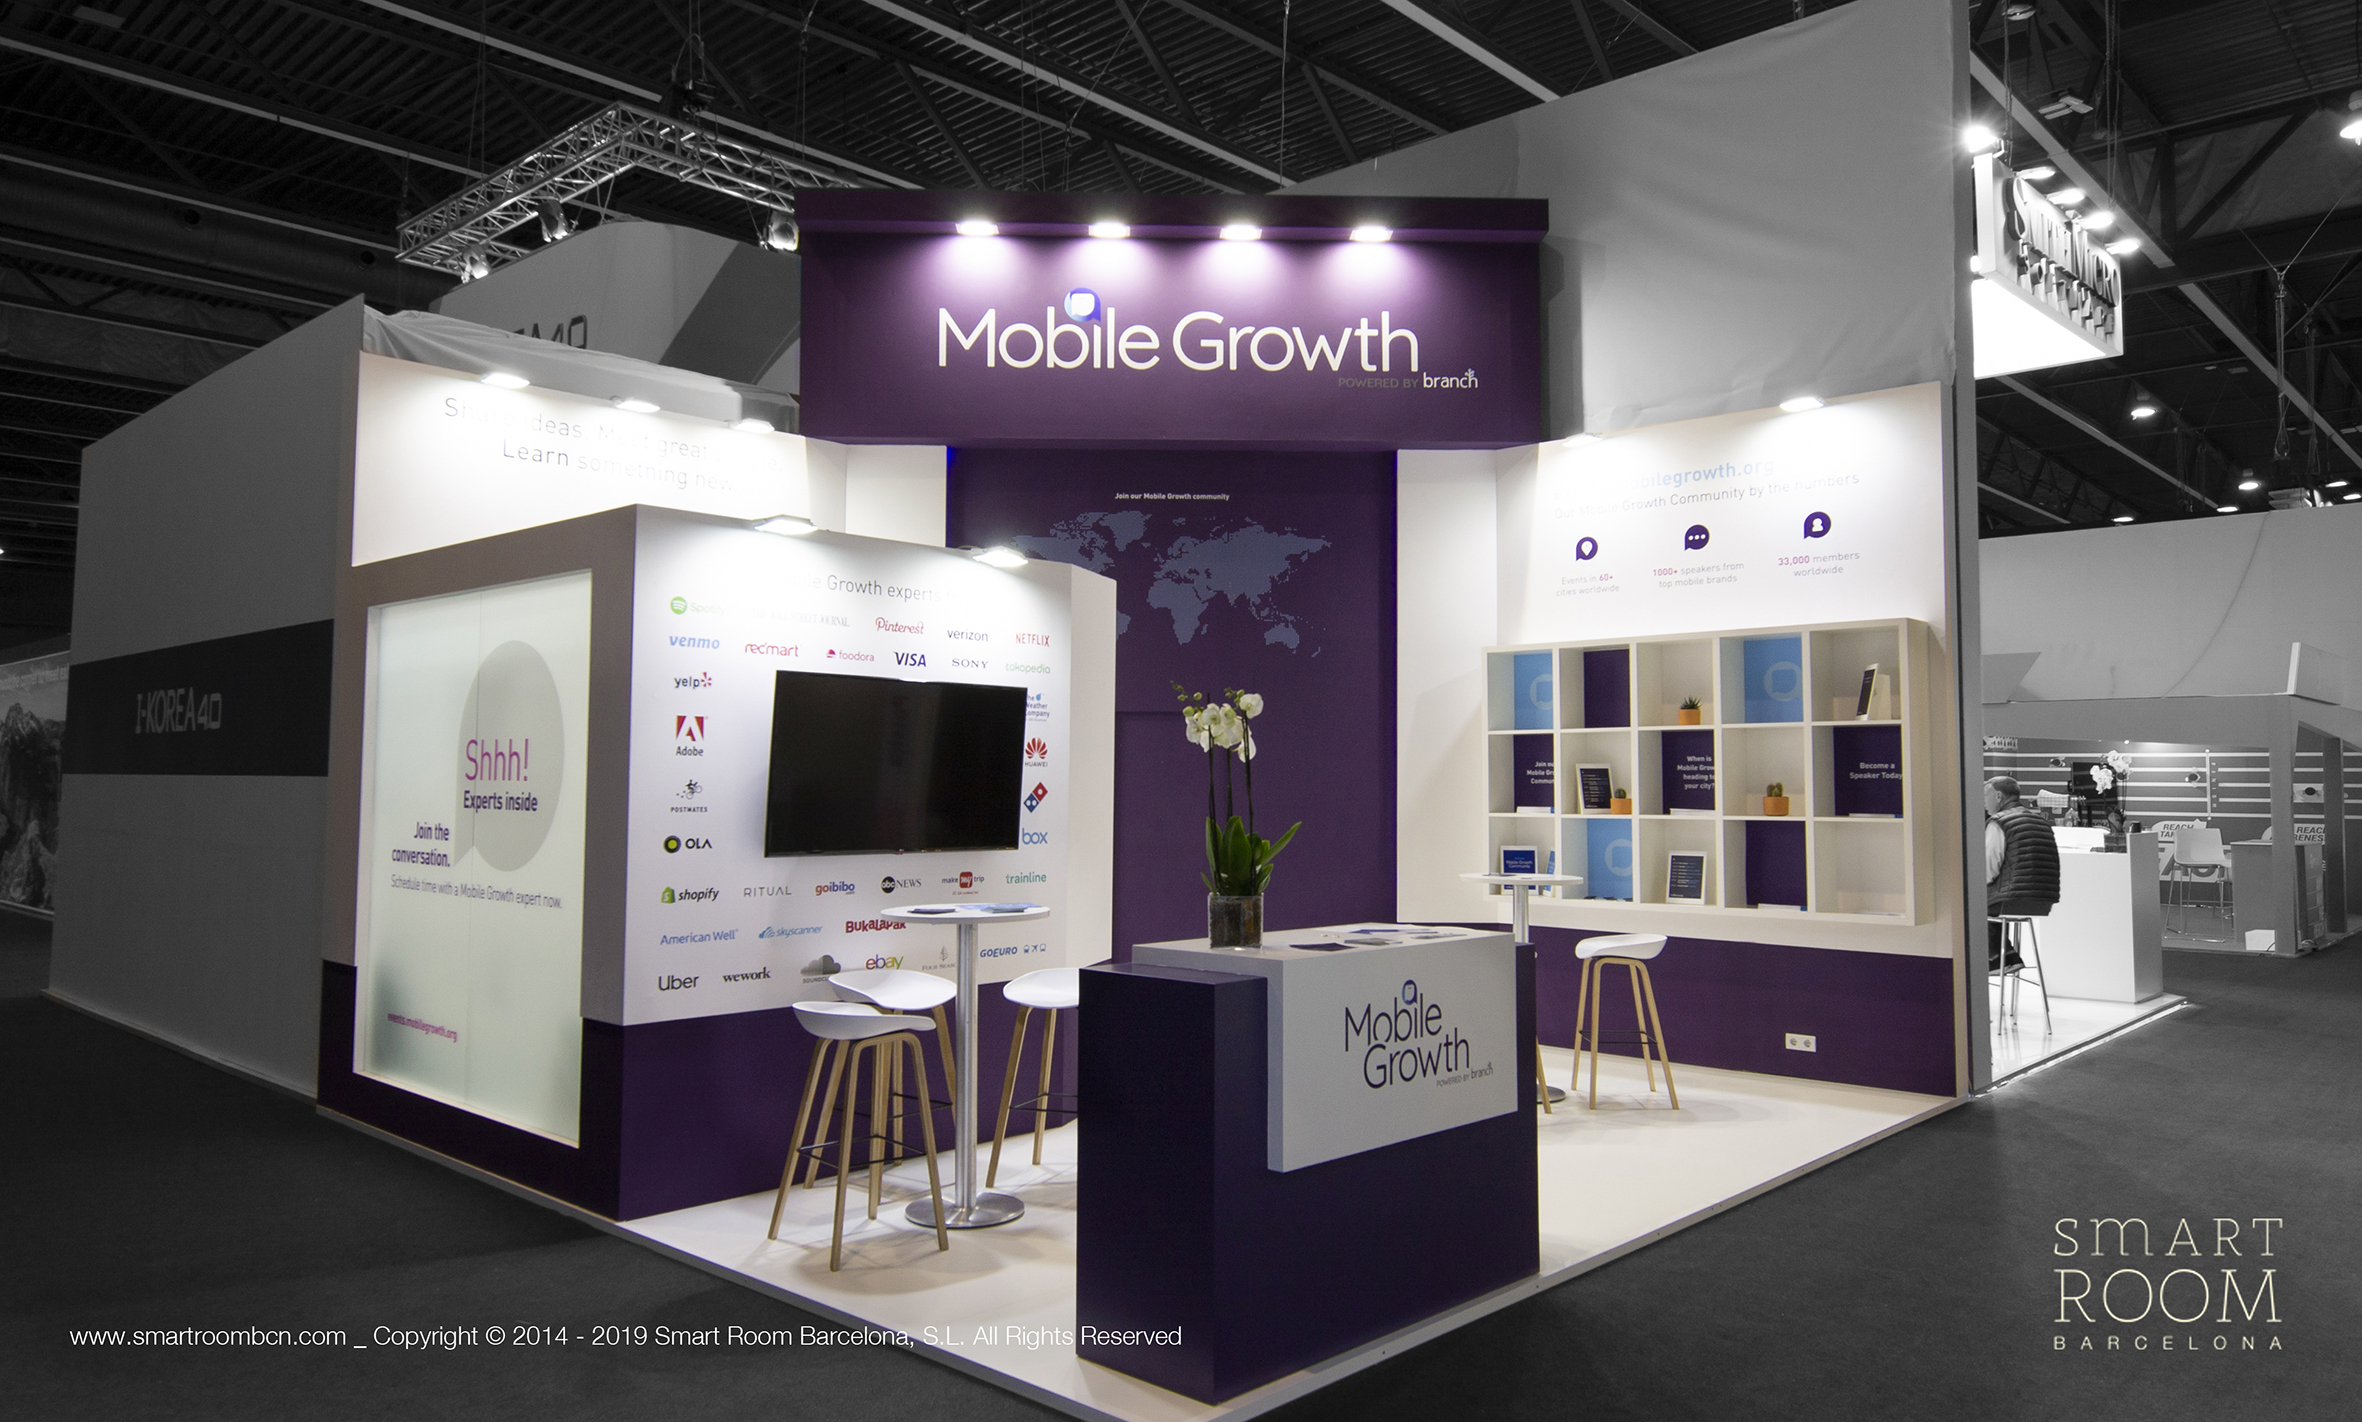 Stand for Branch at MWC by Smart Room Barcelona